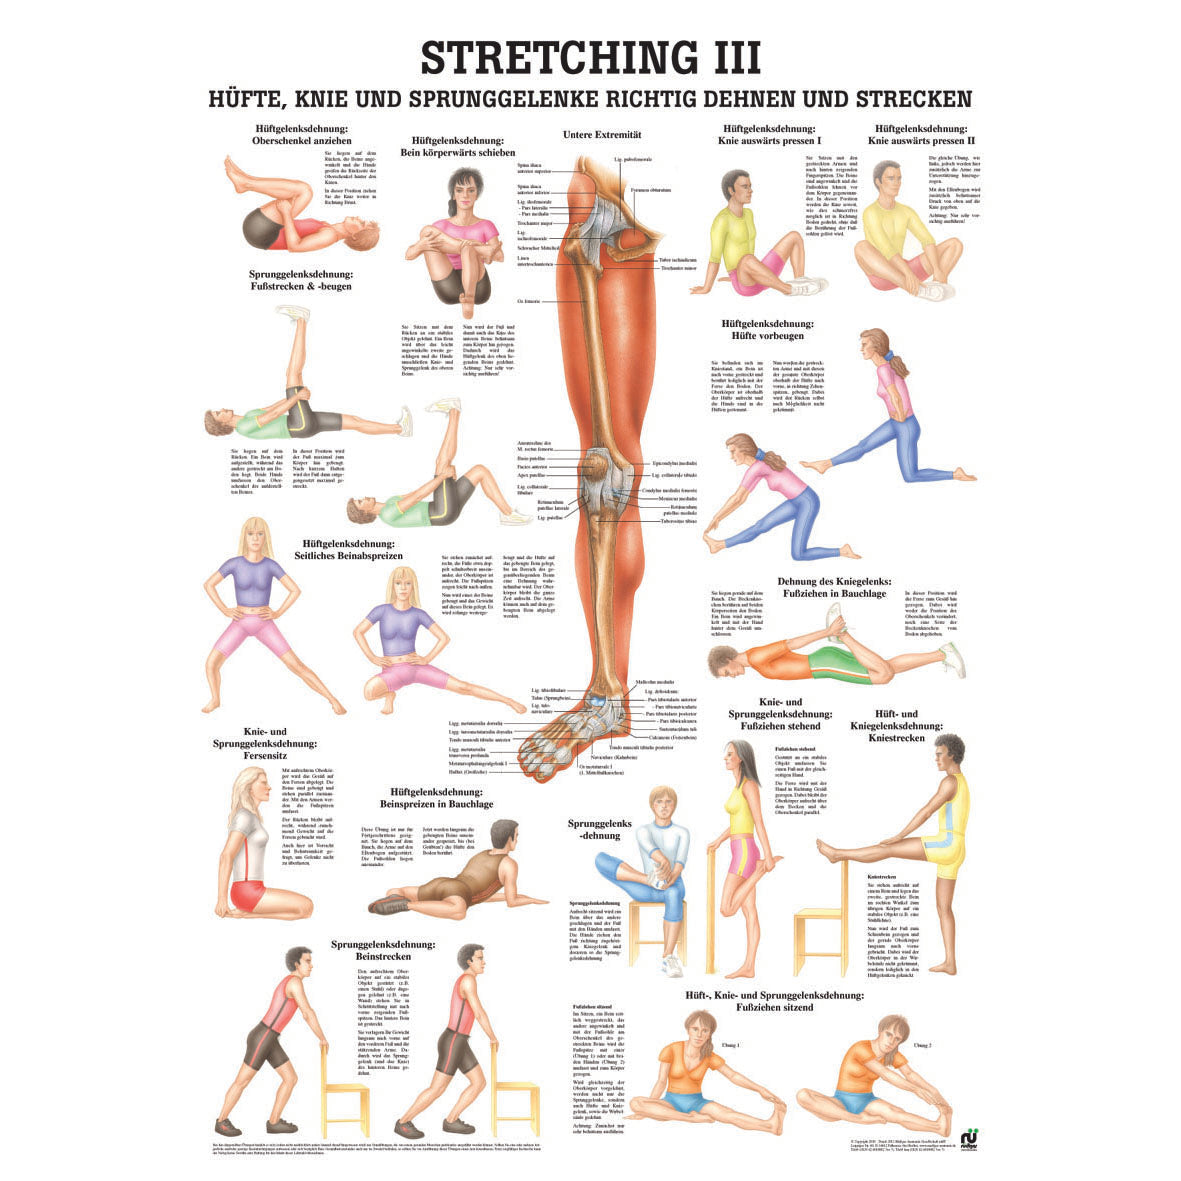 Poster "Stretching III"